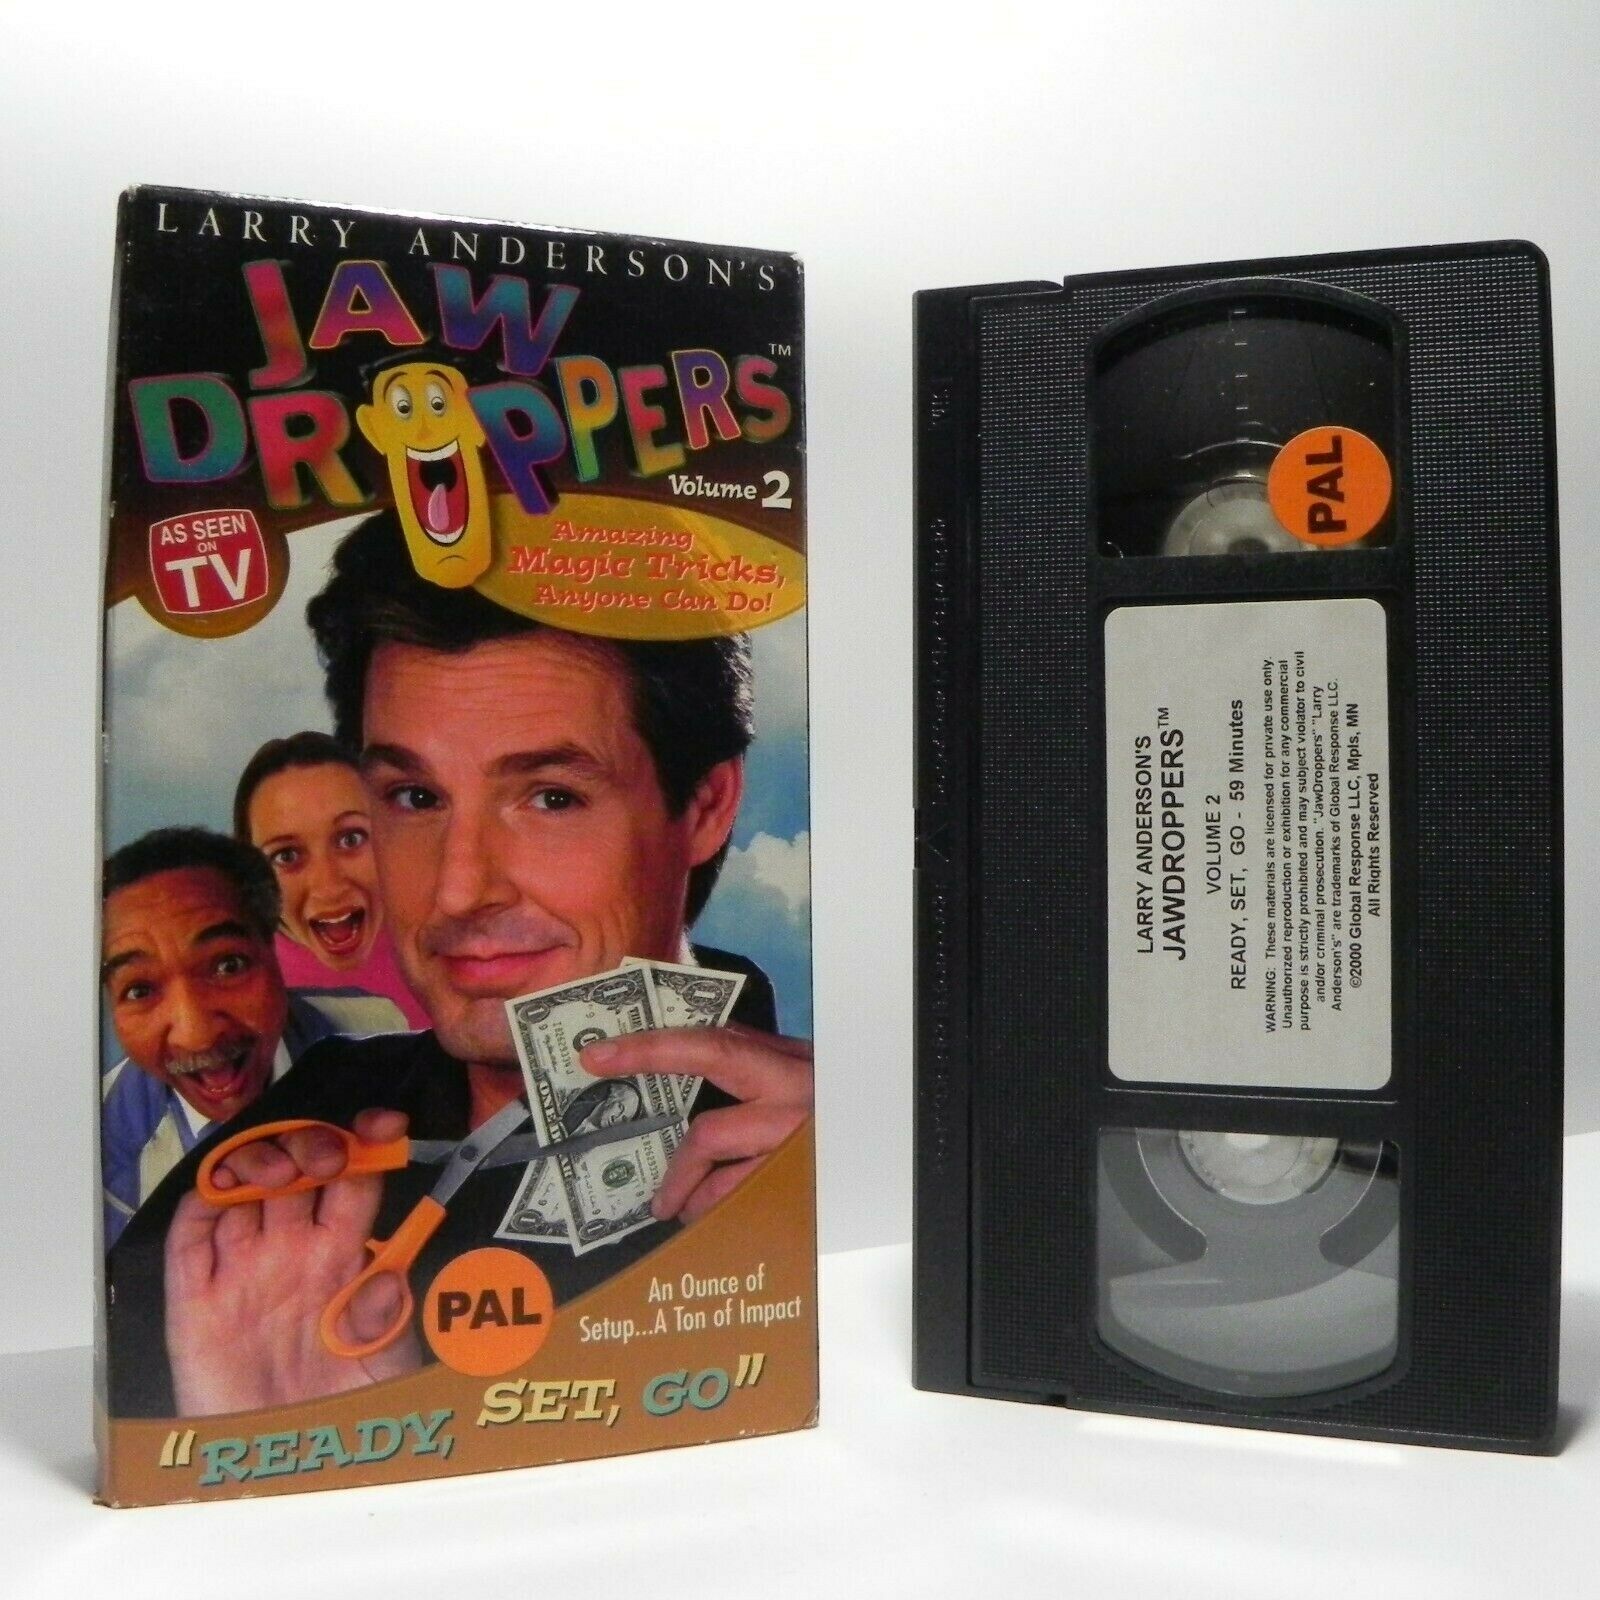 Jaw Droppers Vol.2: Ready, Set, Go - Larry Anderson - Magic Tricks - Pal VHS-